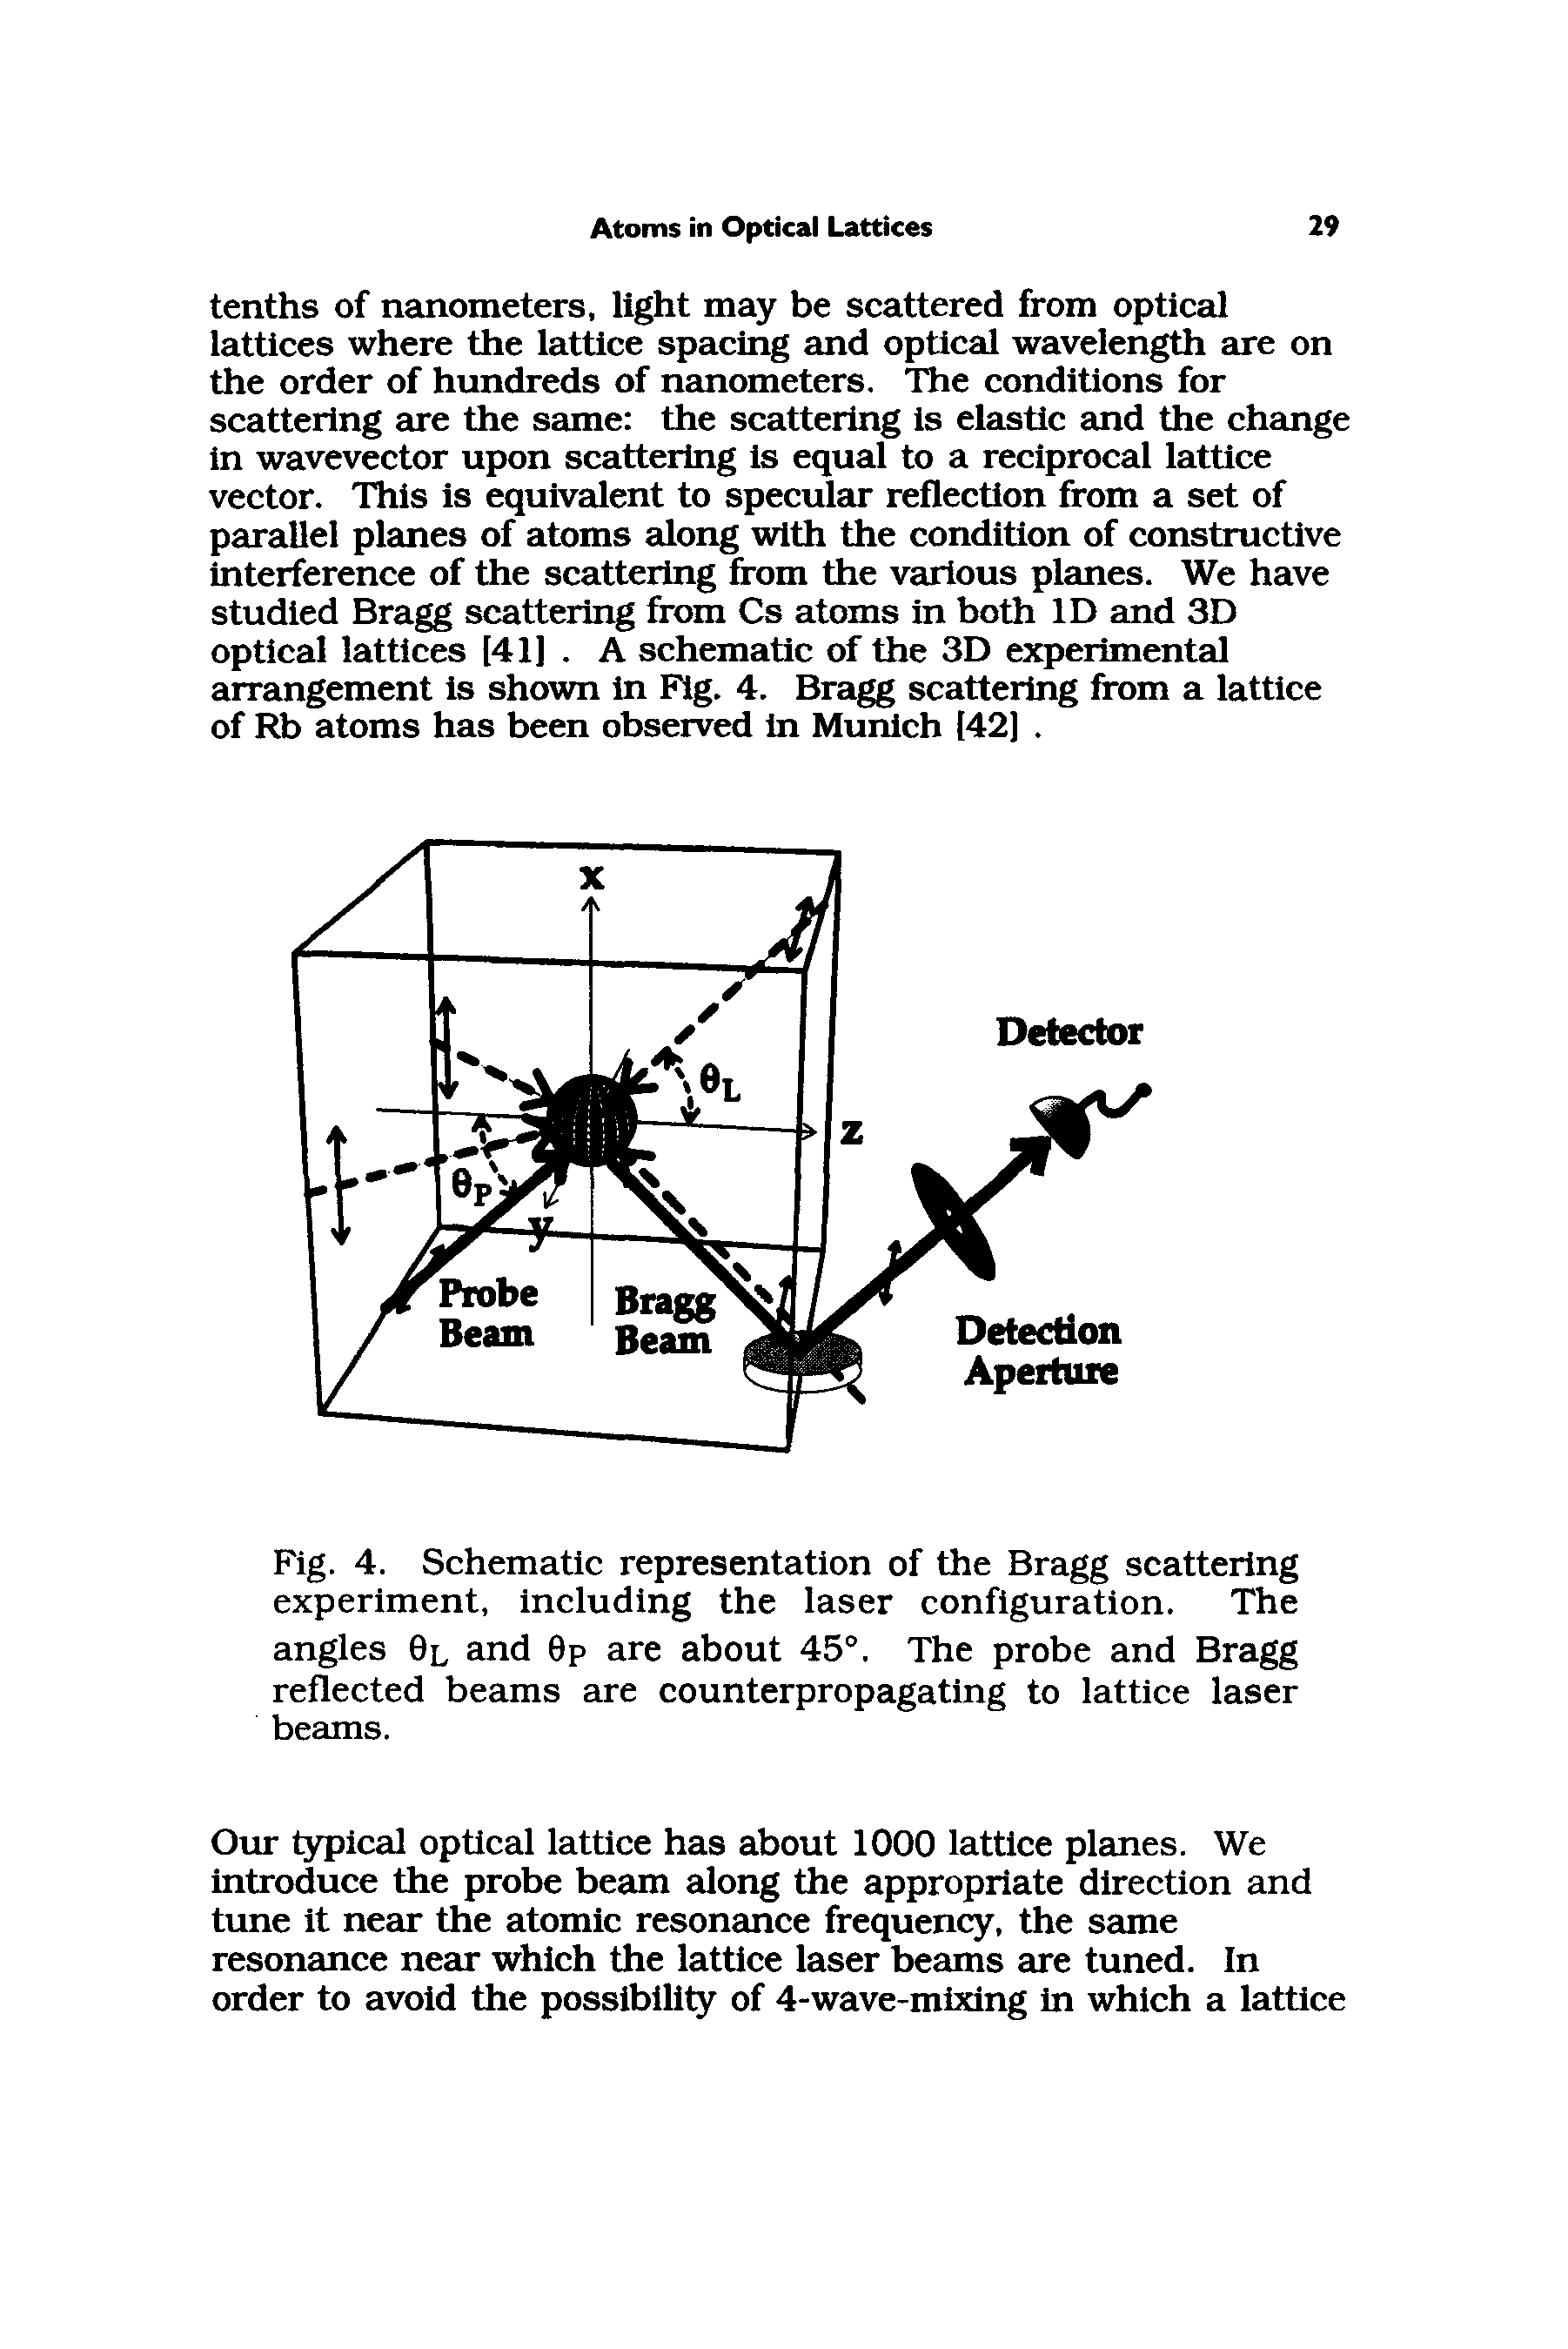 Fig. 4. Schematic representation of the Bragg scattering experiment, Including the laser configuration. The angles 0l and 9p are about 45°. The probe and Bragg reflected beams are counterpropagating to lattice laser beams.